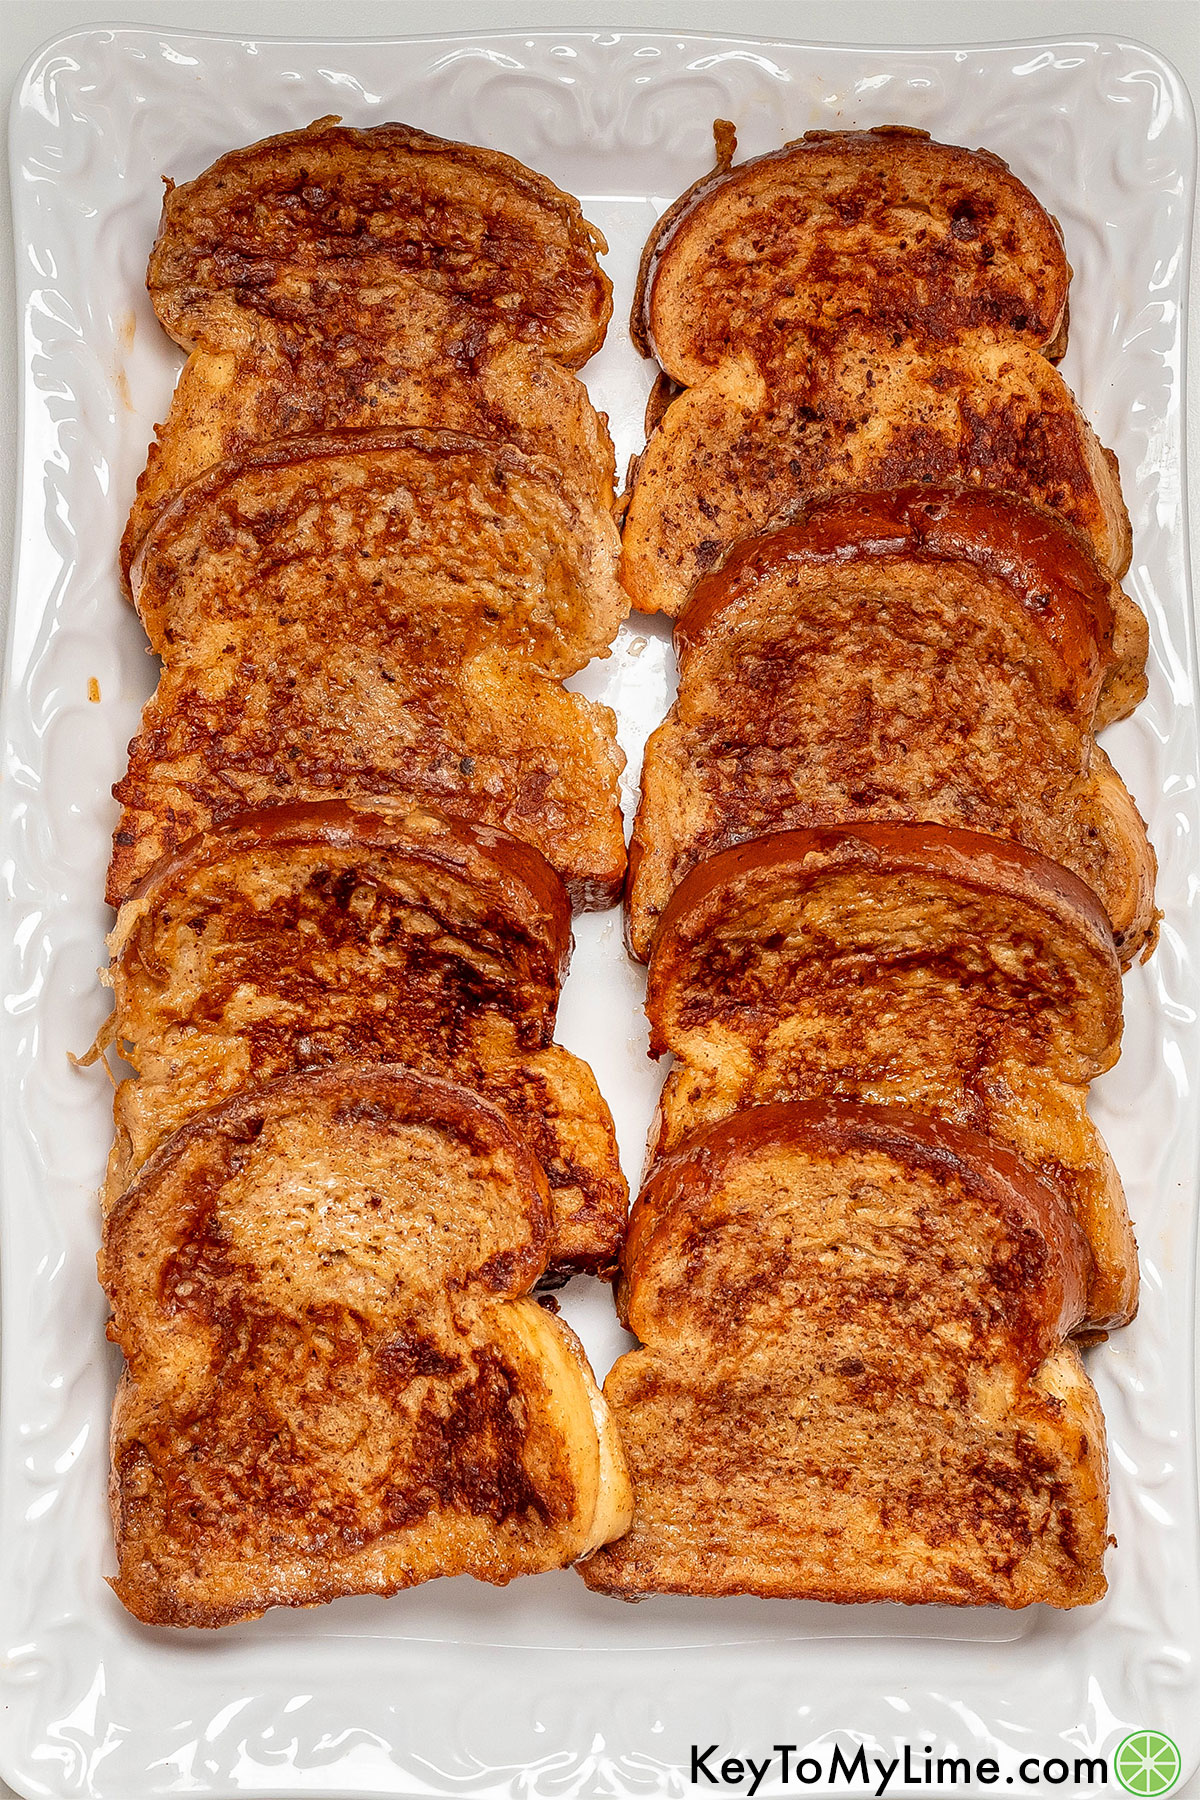 An overhead image of perfectly cooked French toast showing the crispy golden texture on a large white platter.